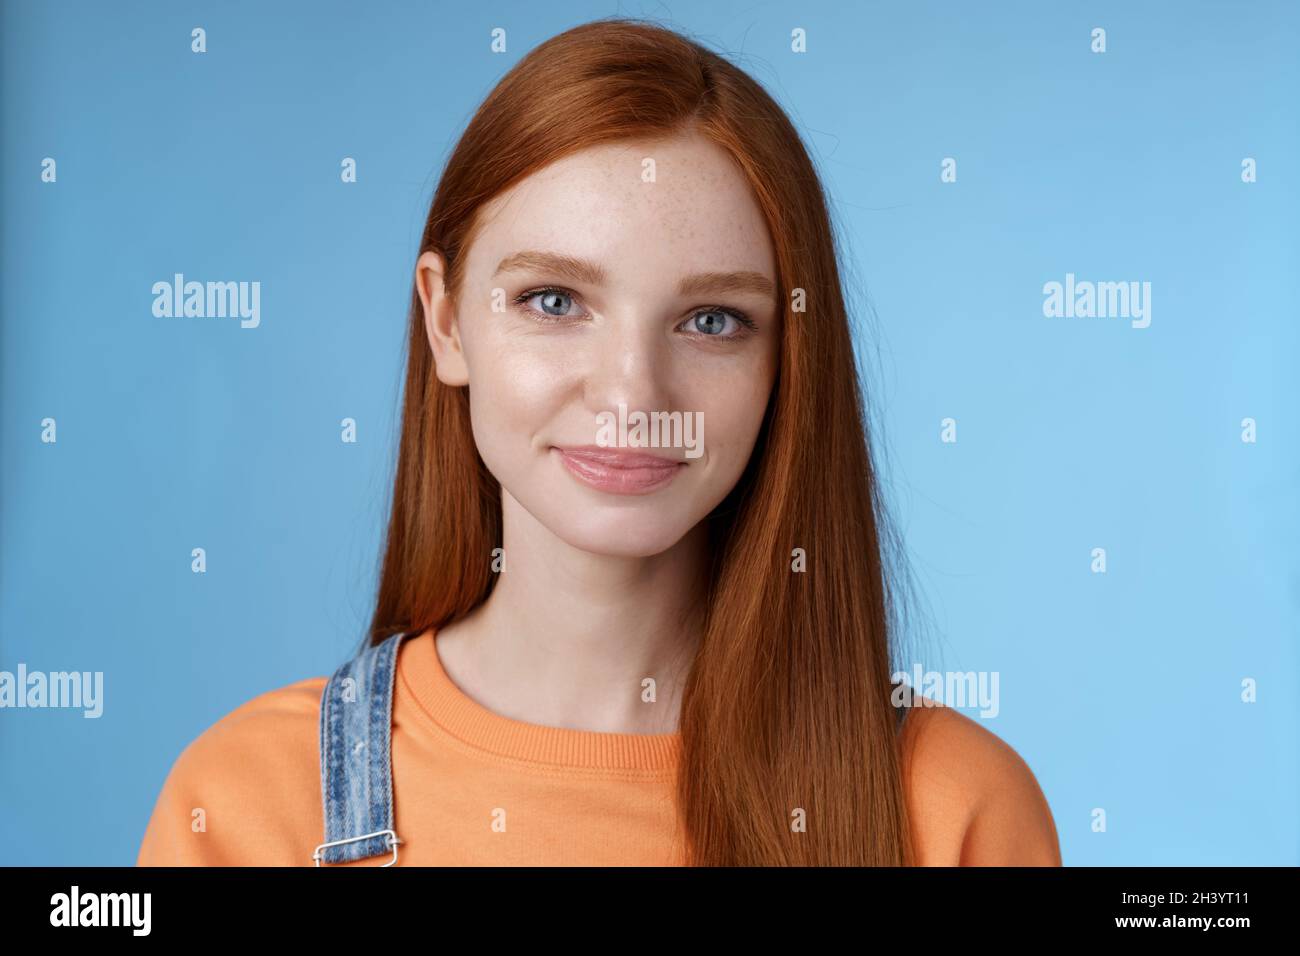 Outgoing young redhead girl blue eyes wearing orange t-shirt overalls smiling pleasantly casually talking standing good mood joy Stock Photo